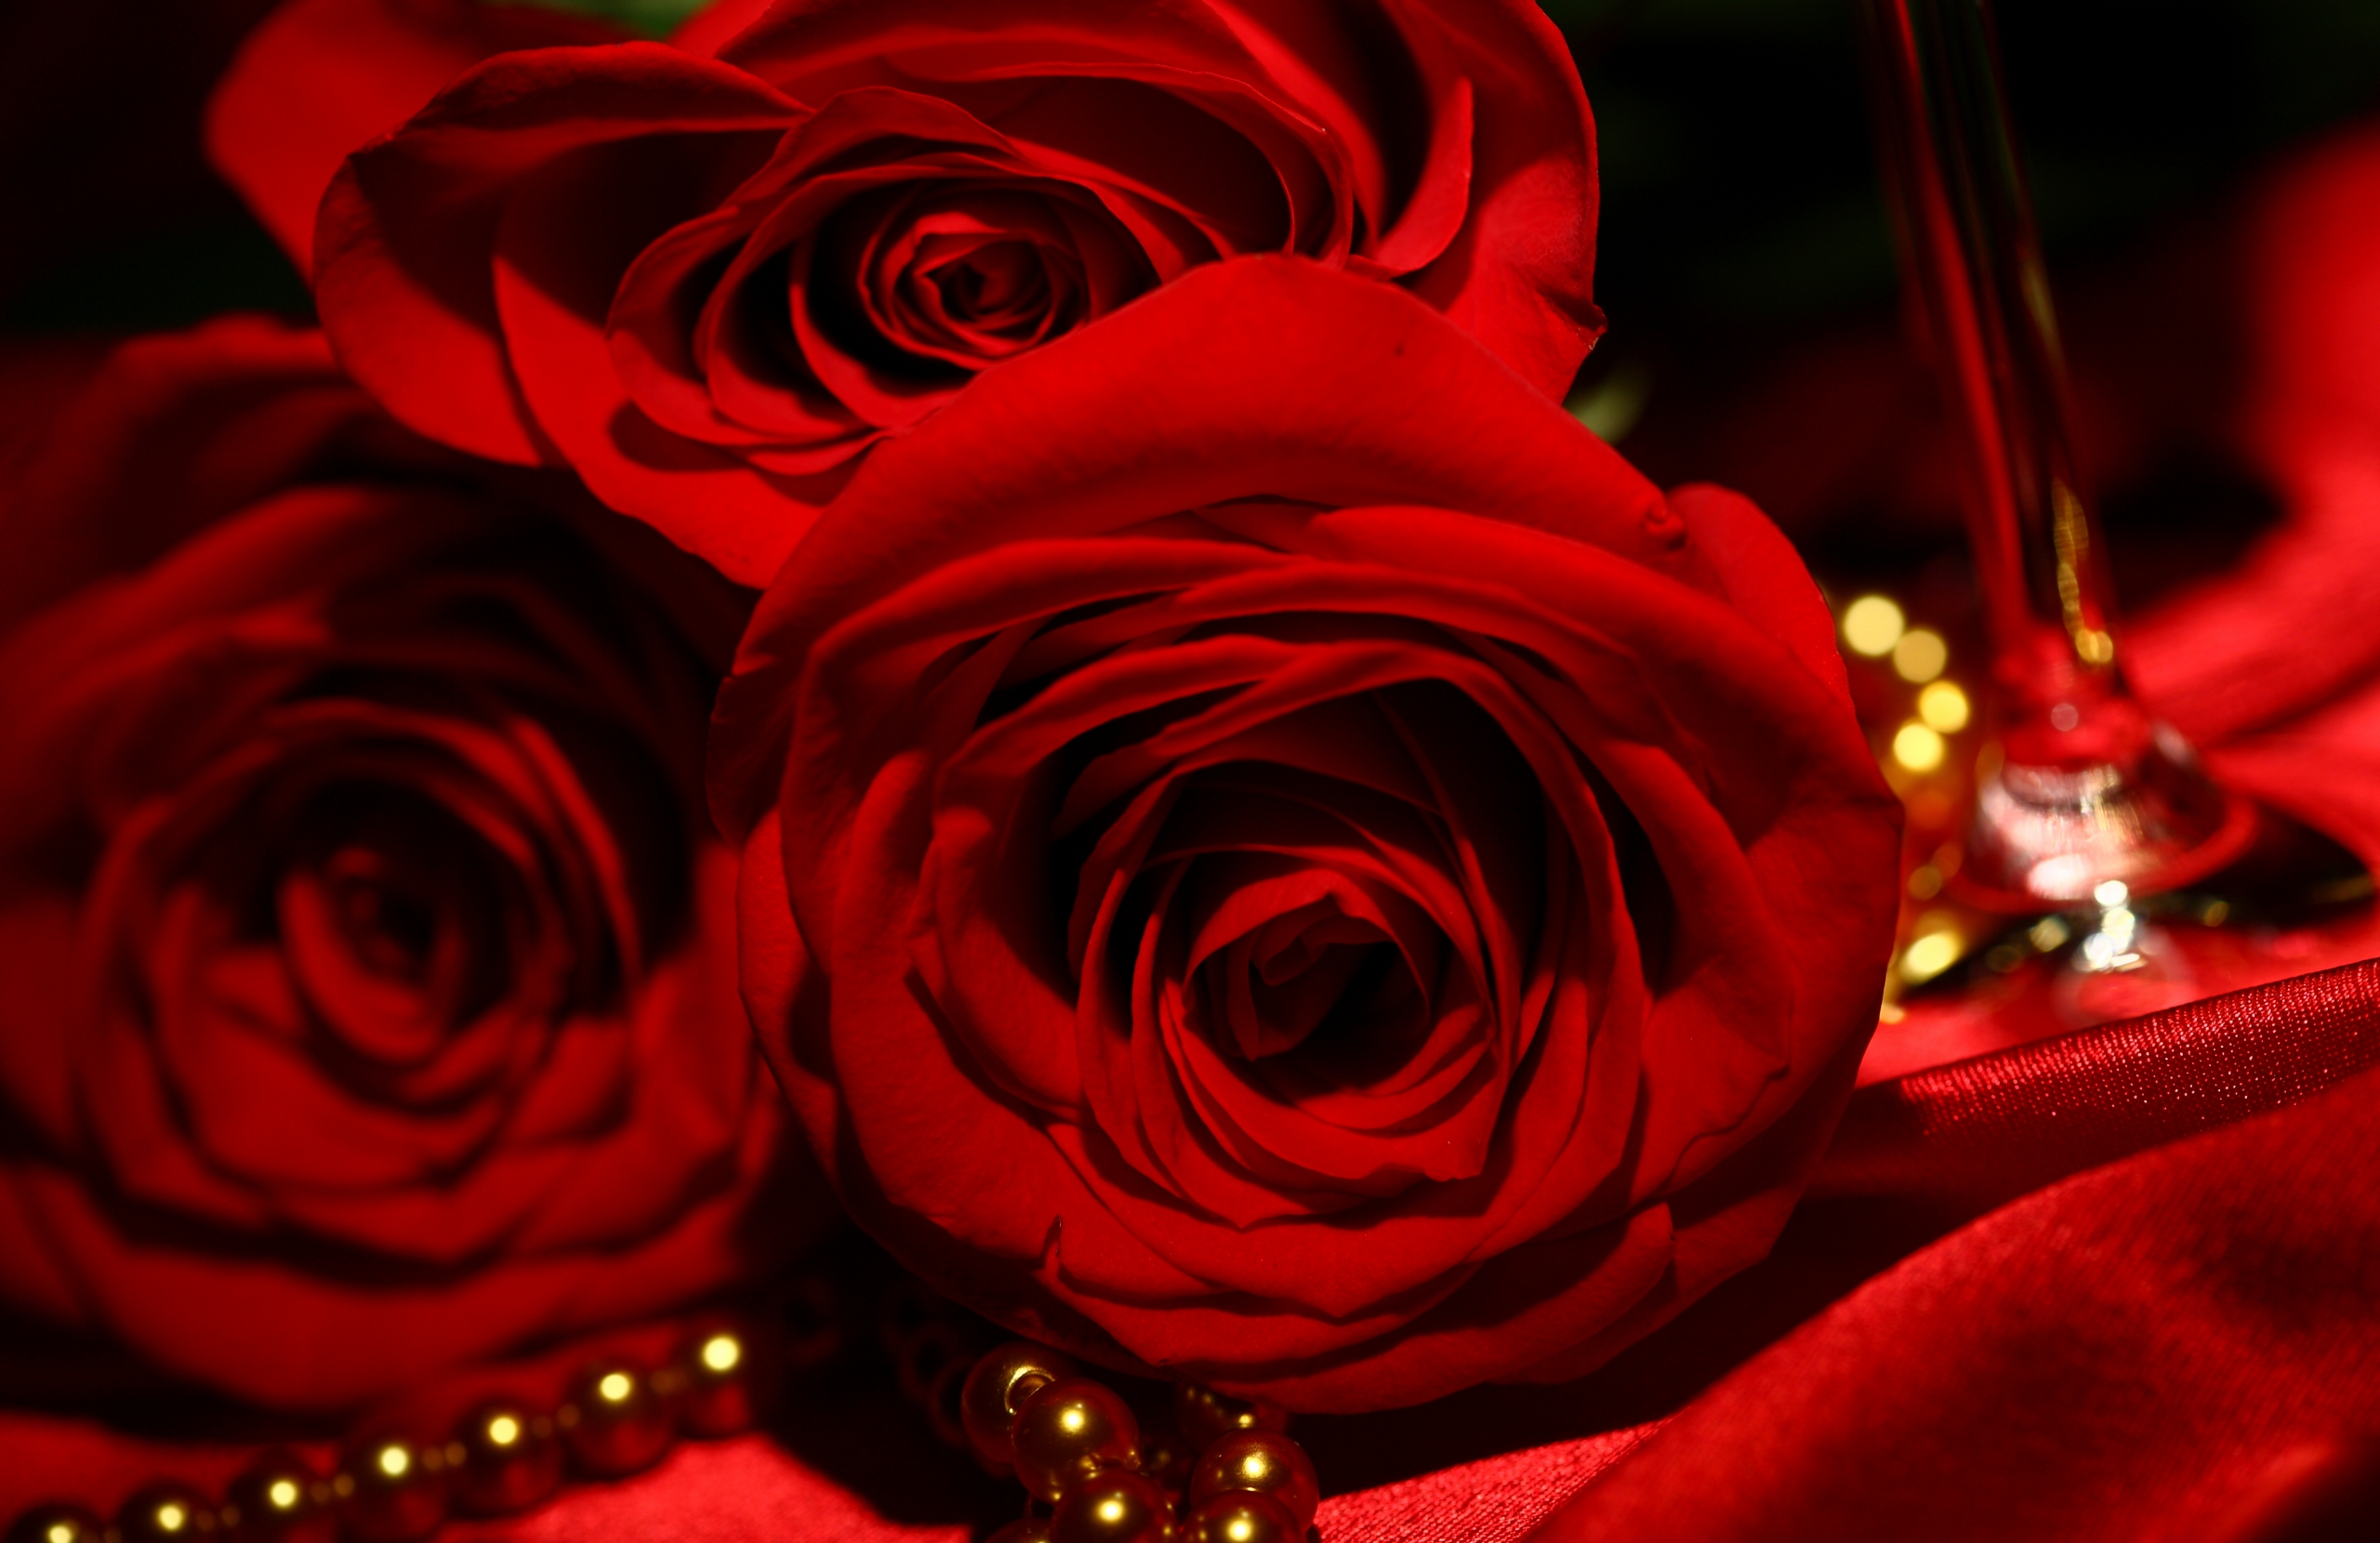 Red Roses Backgrounds - Wallpaper, High Definition, High Quality, Widescreen